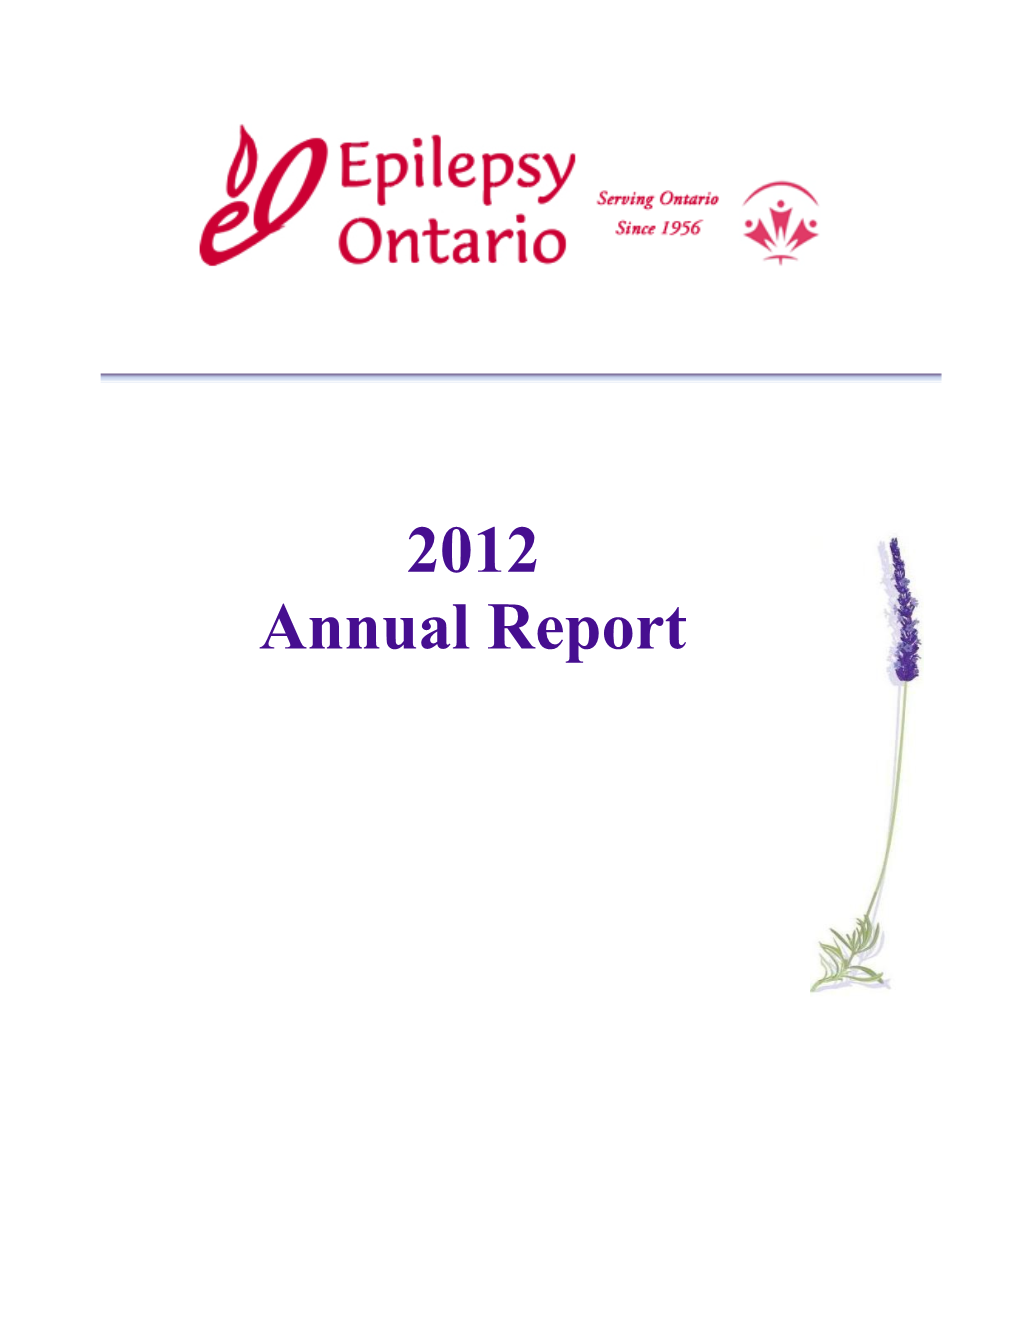 2011 Has Been a Year of Significant Change at Epilepsy Ontario